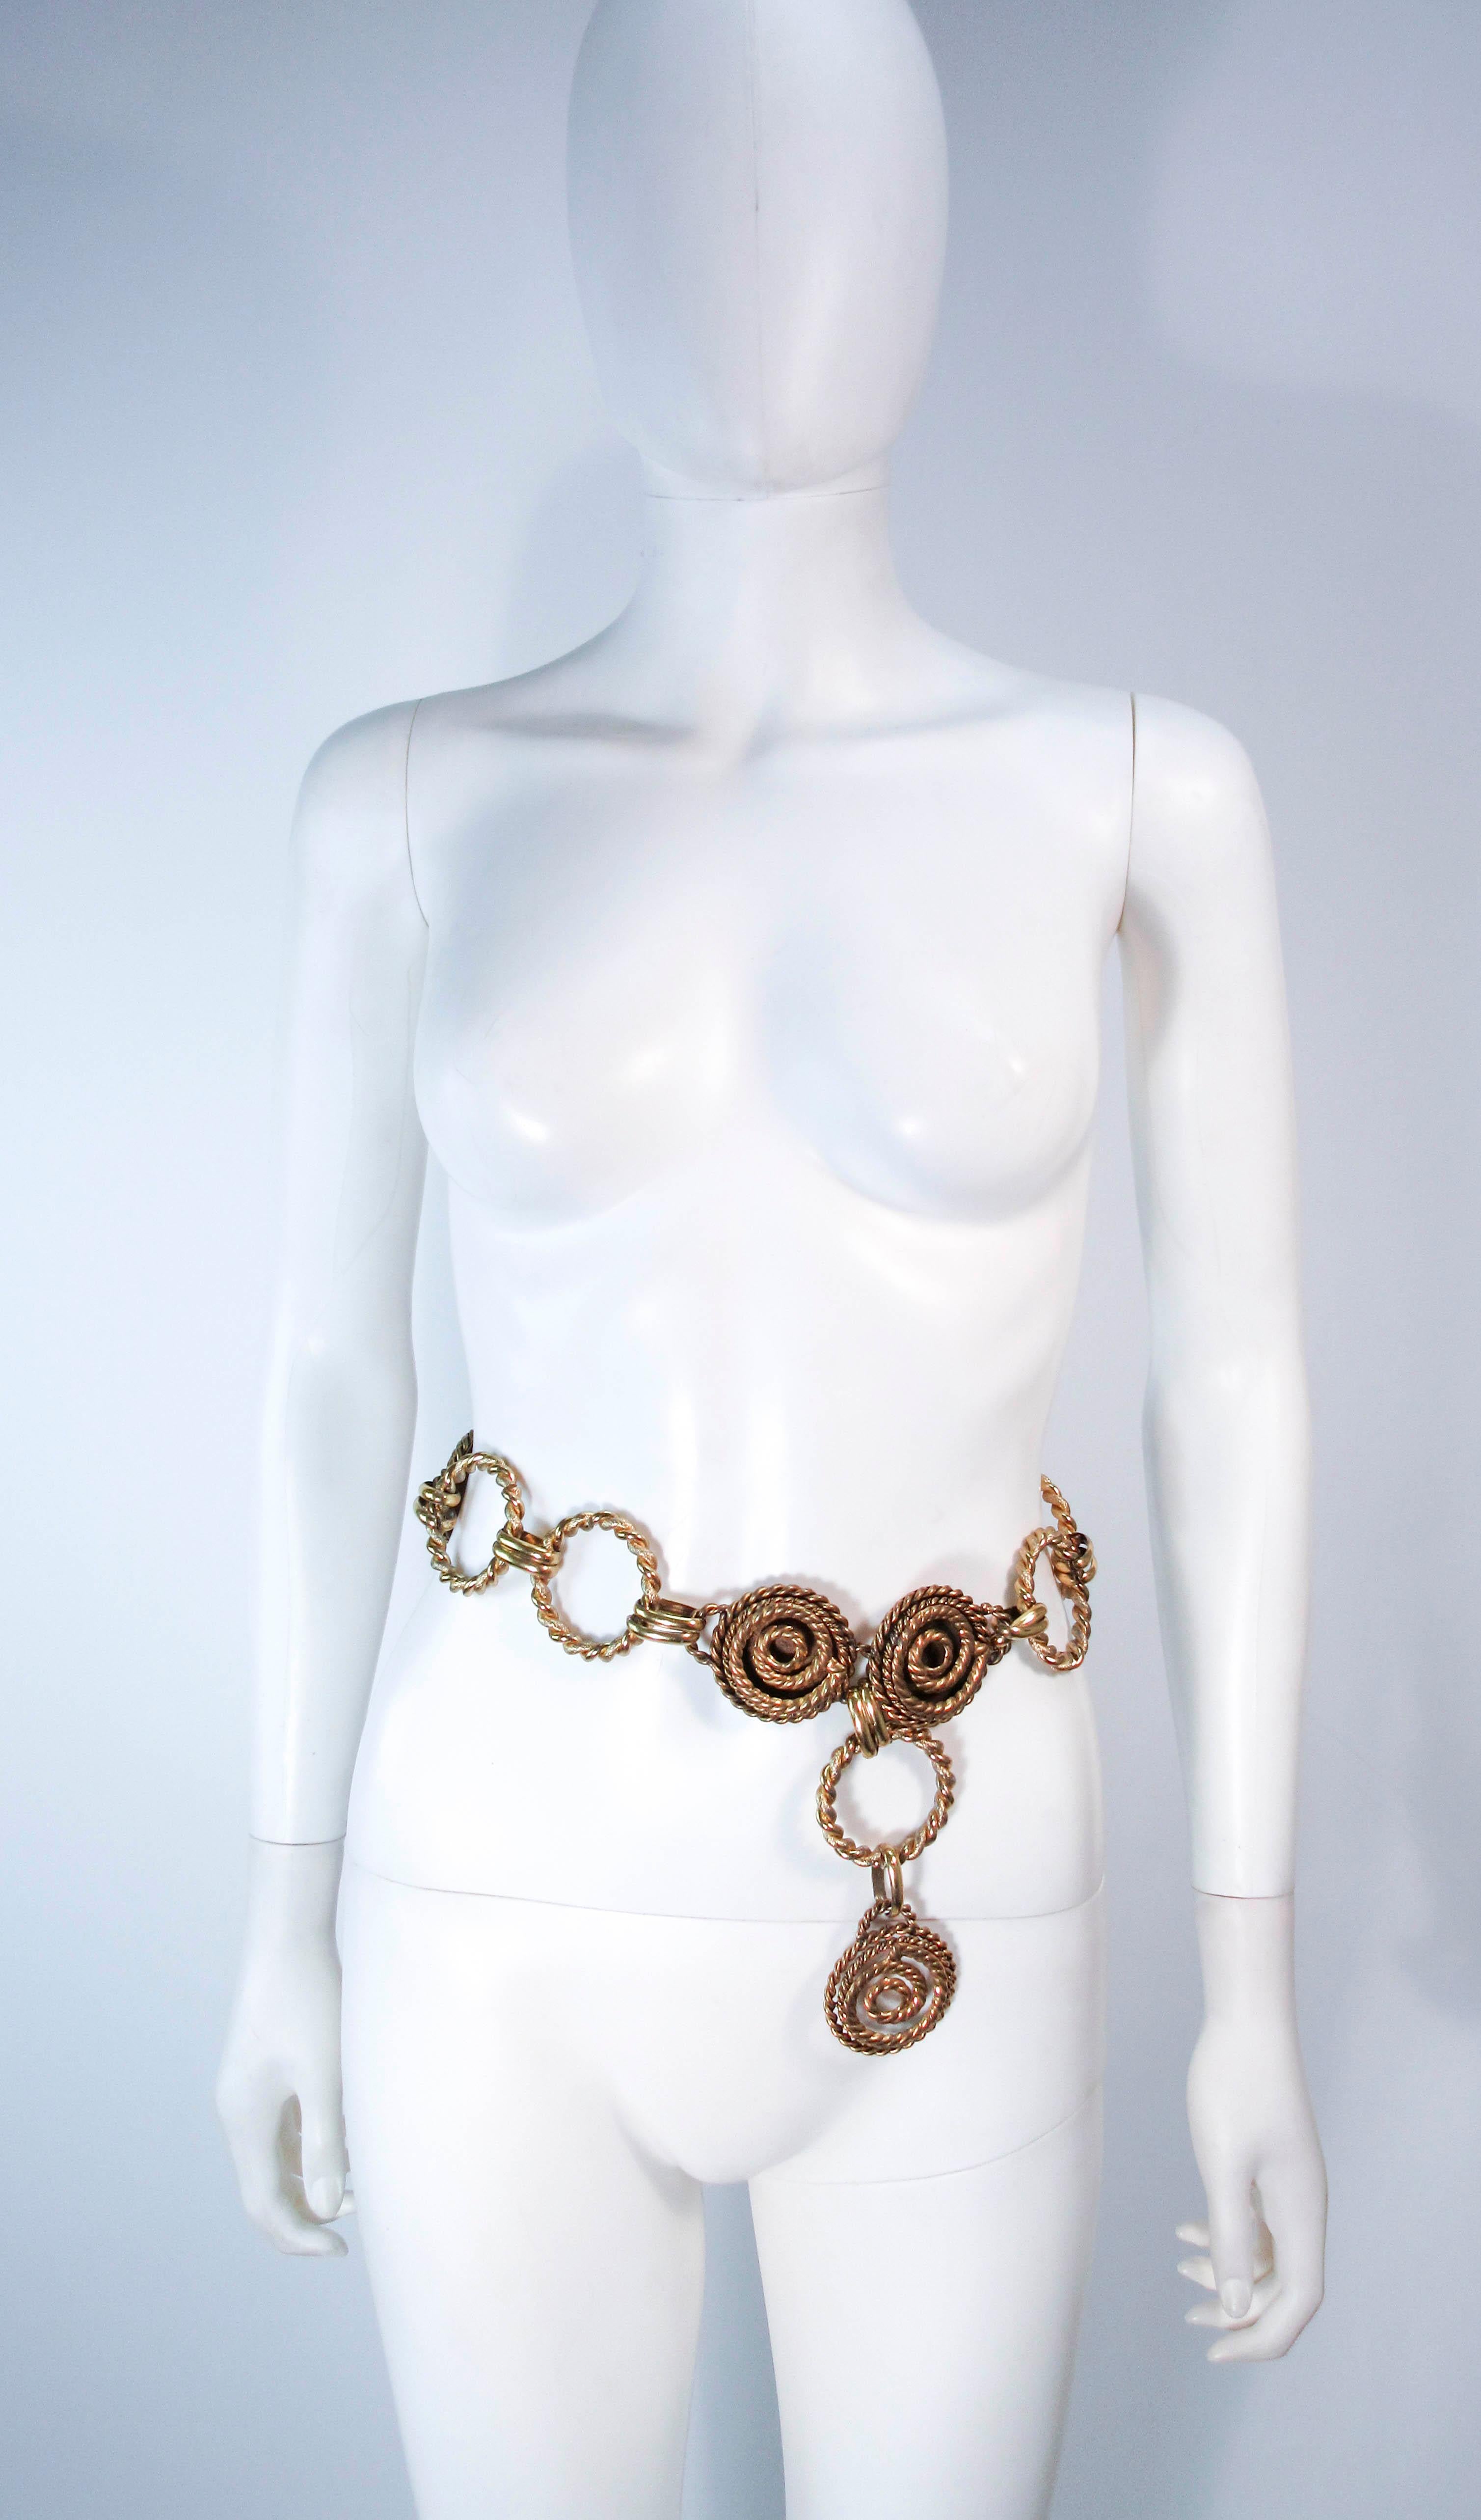 This vintage Butler & Wilson gold tone belt feature a swirl design and dangle style. This is a fantastic statement piece and excellent addition to any collectors wardrobe. In excellent vintage condition (some signs of wear due to age, see photos).